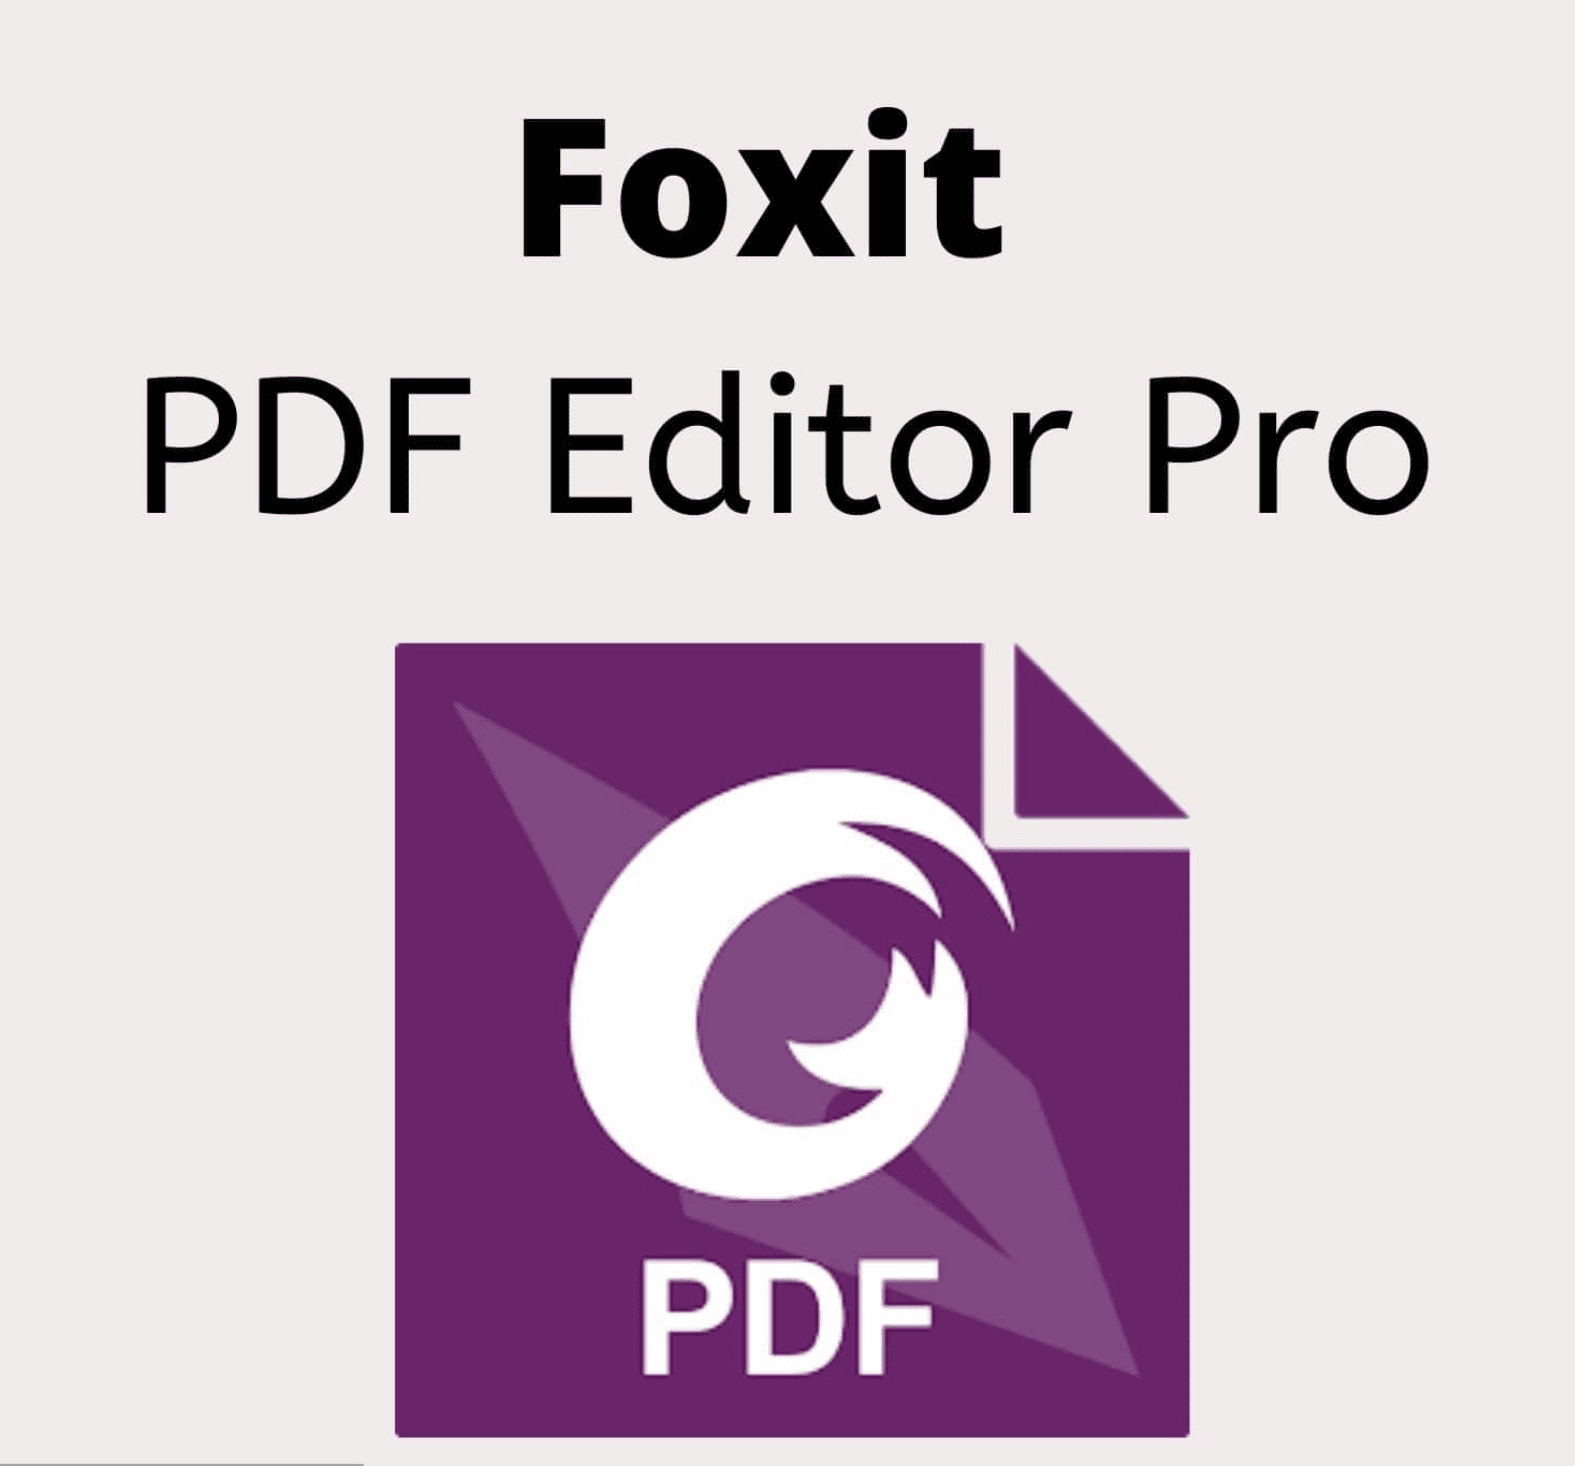 Version 1: Foxit PDF Editor Pro v1.0.0.0 - cracked version for editing PDF files efficiently.